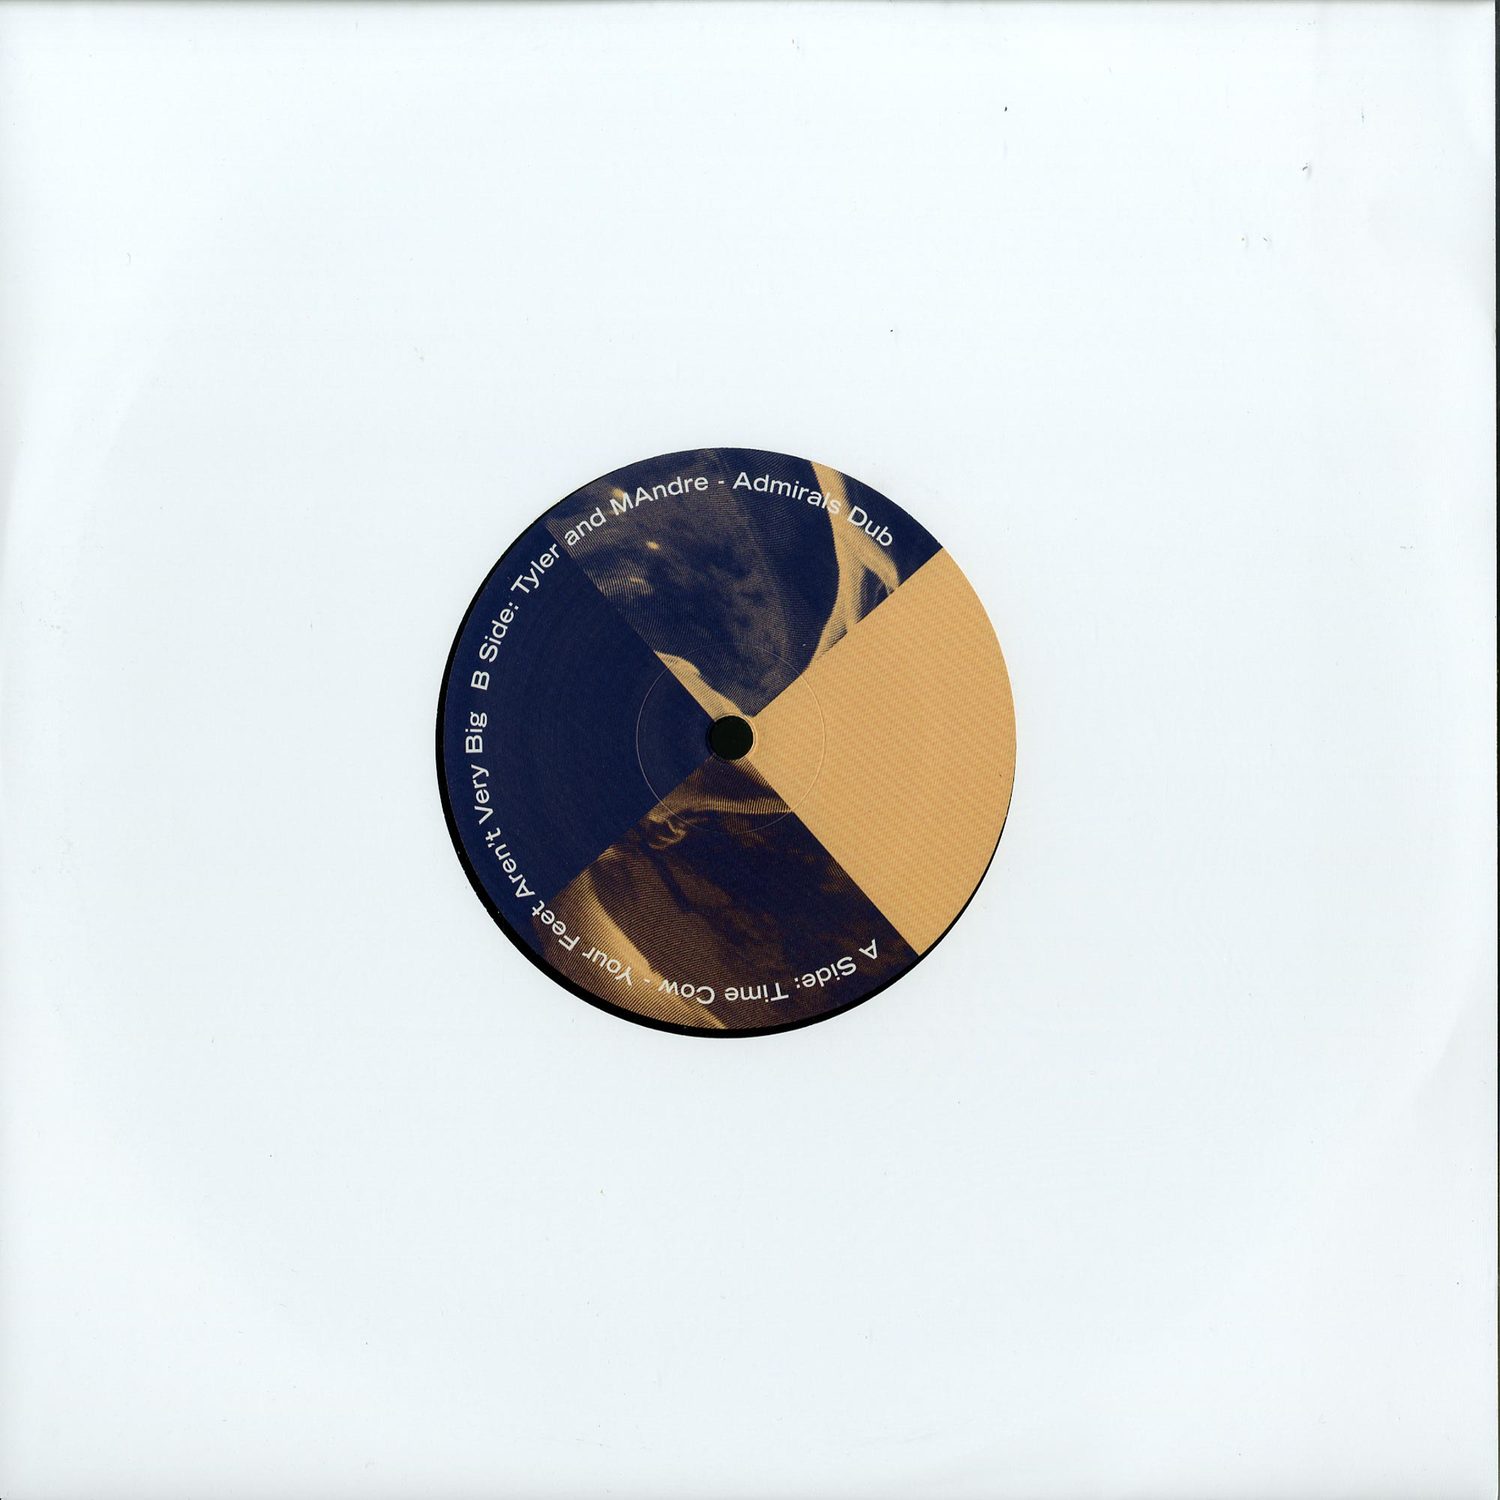 Time Cow/Tyler And Mandre - INTERFERENCE PATTERN 003 EP 